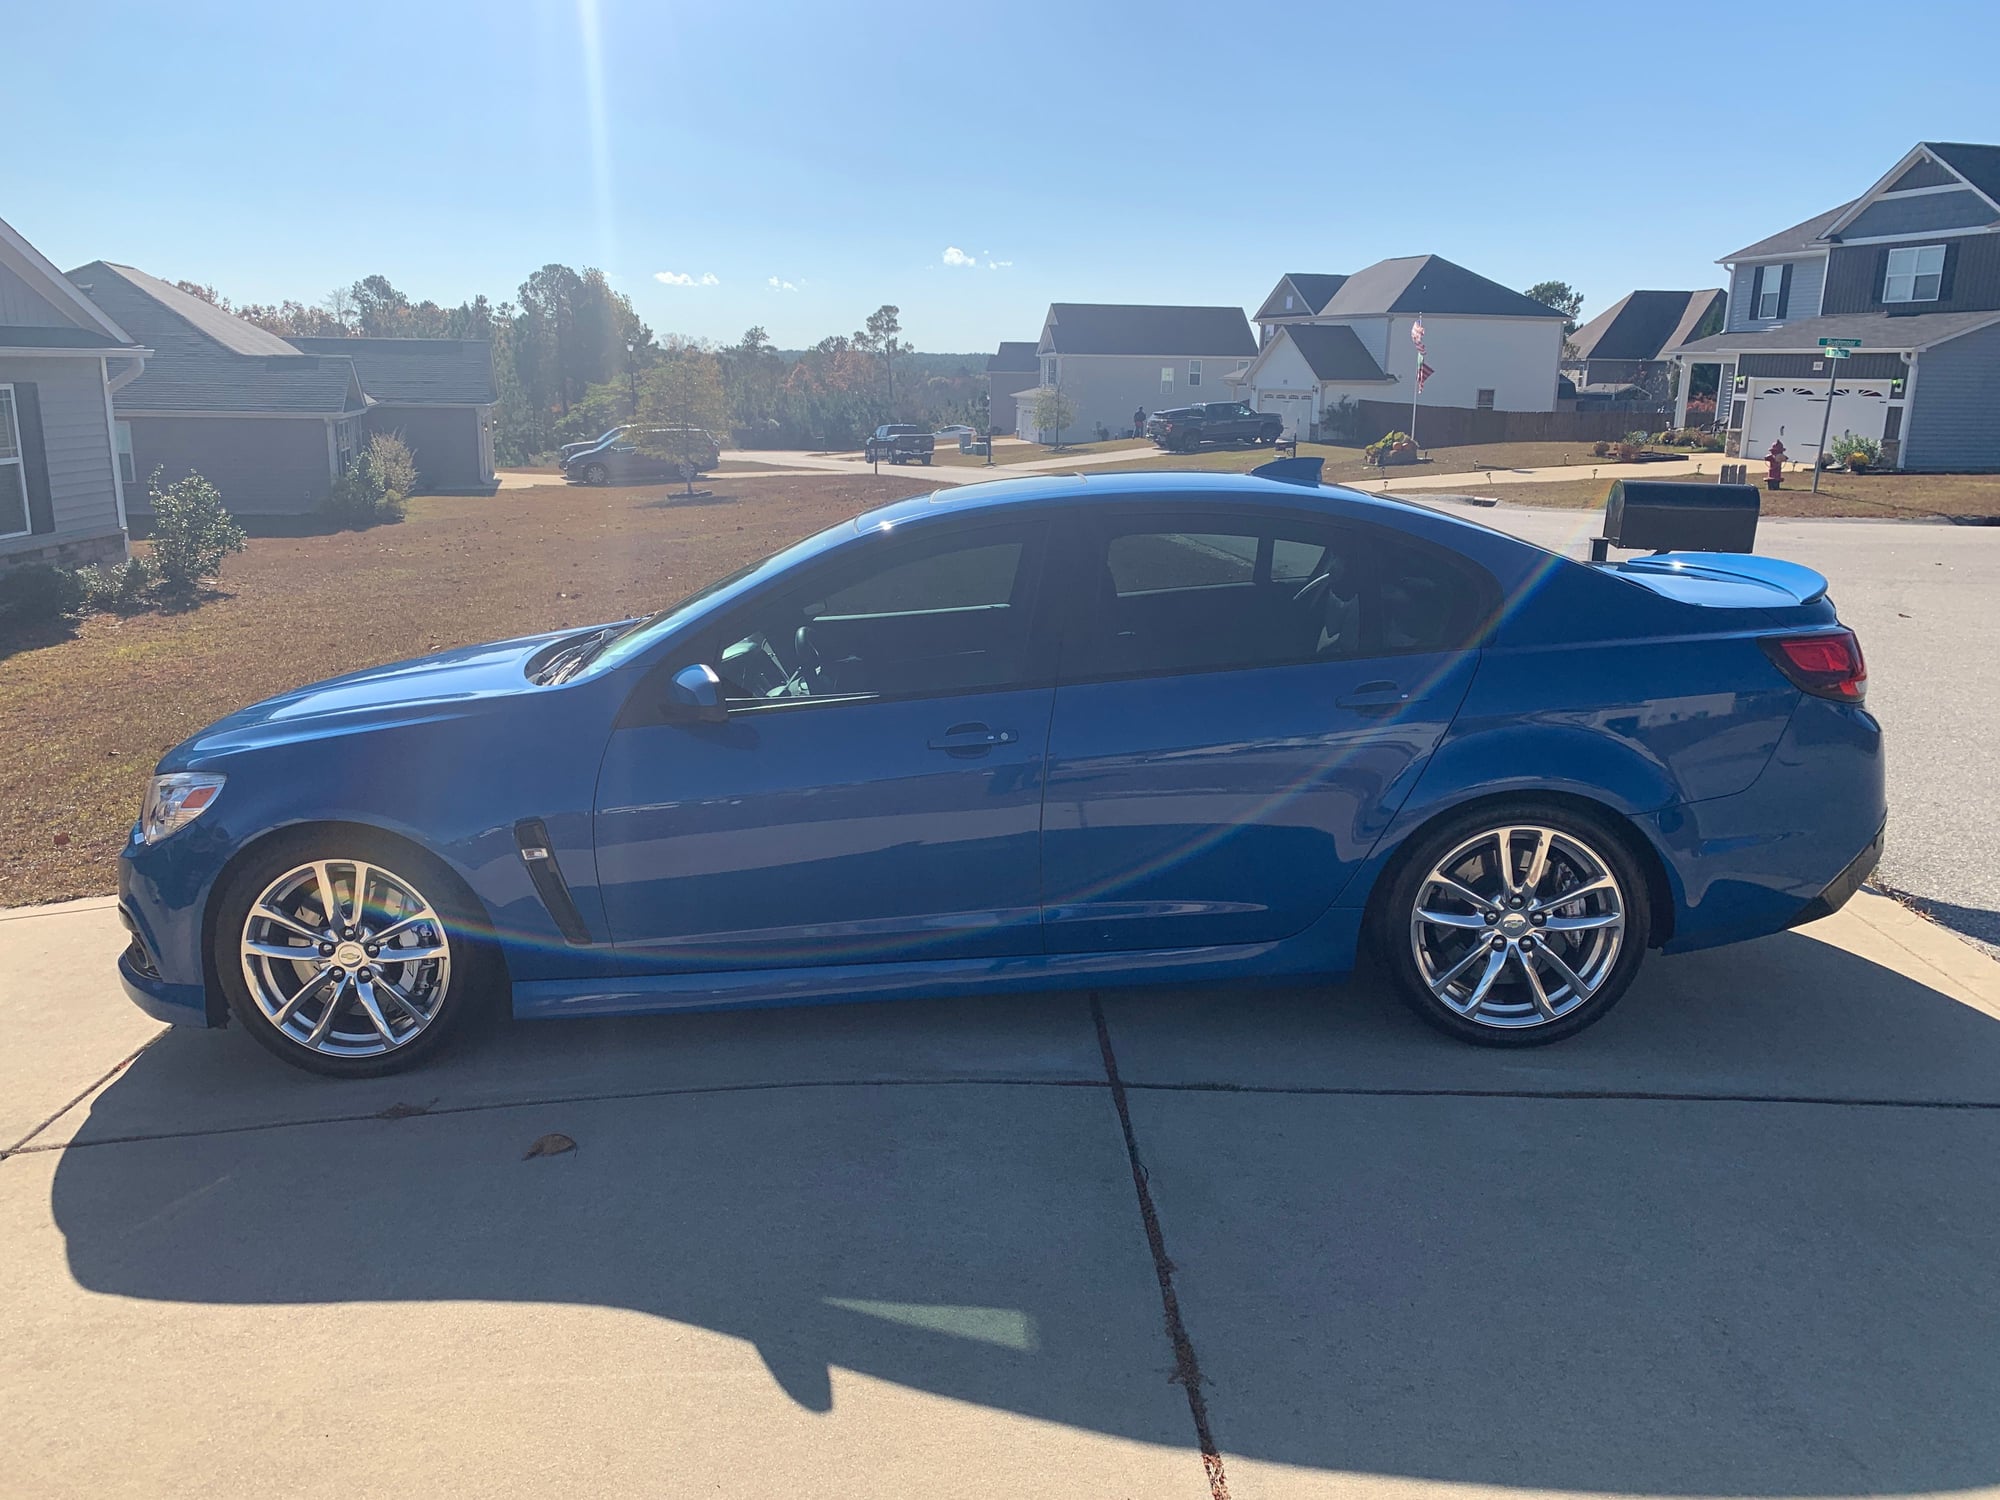 2015 Chevrolet SS - 2015 Chevy SS 6AT Perfect Blue Metallic - Used - VIN 6G3F15RW2FL105290 - 50,601 Miles - 8 cyl - 2WD - Automatic - Sedan - Blue - Fayetteville, NC 28314, United States